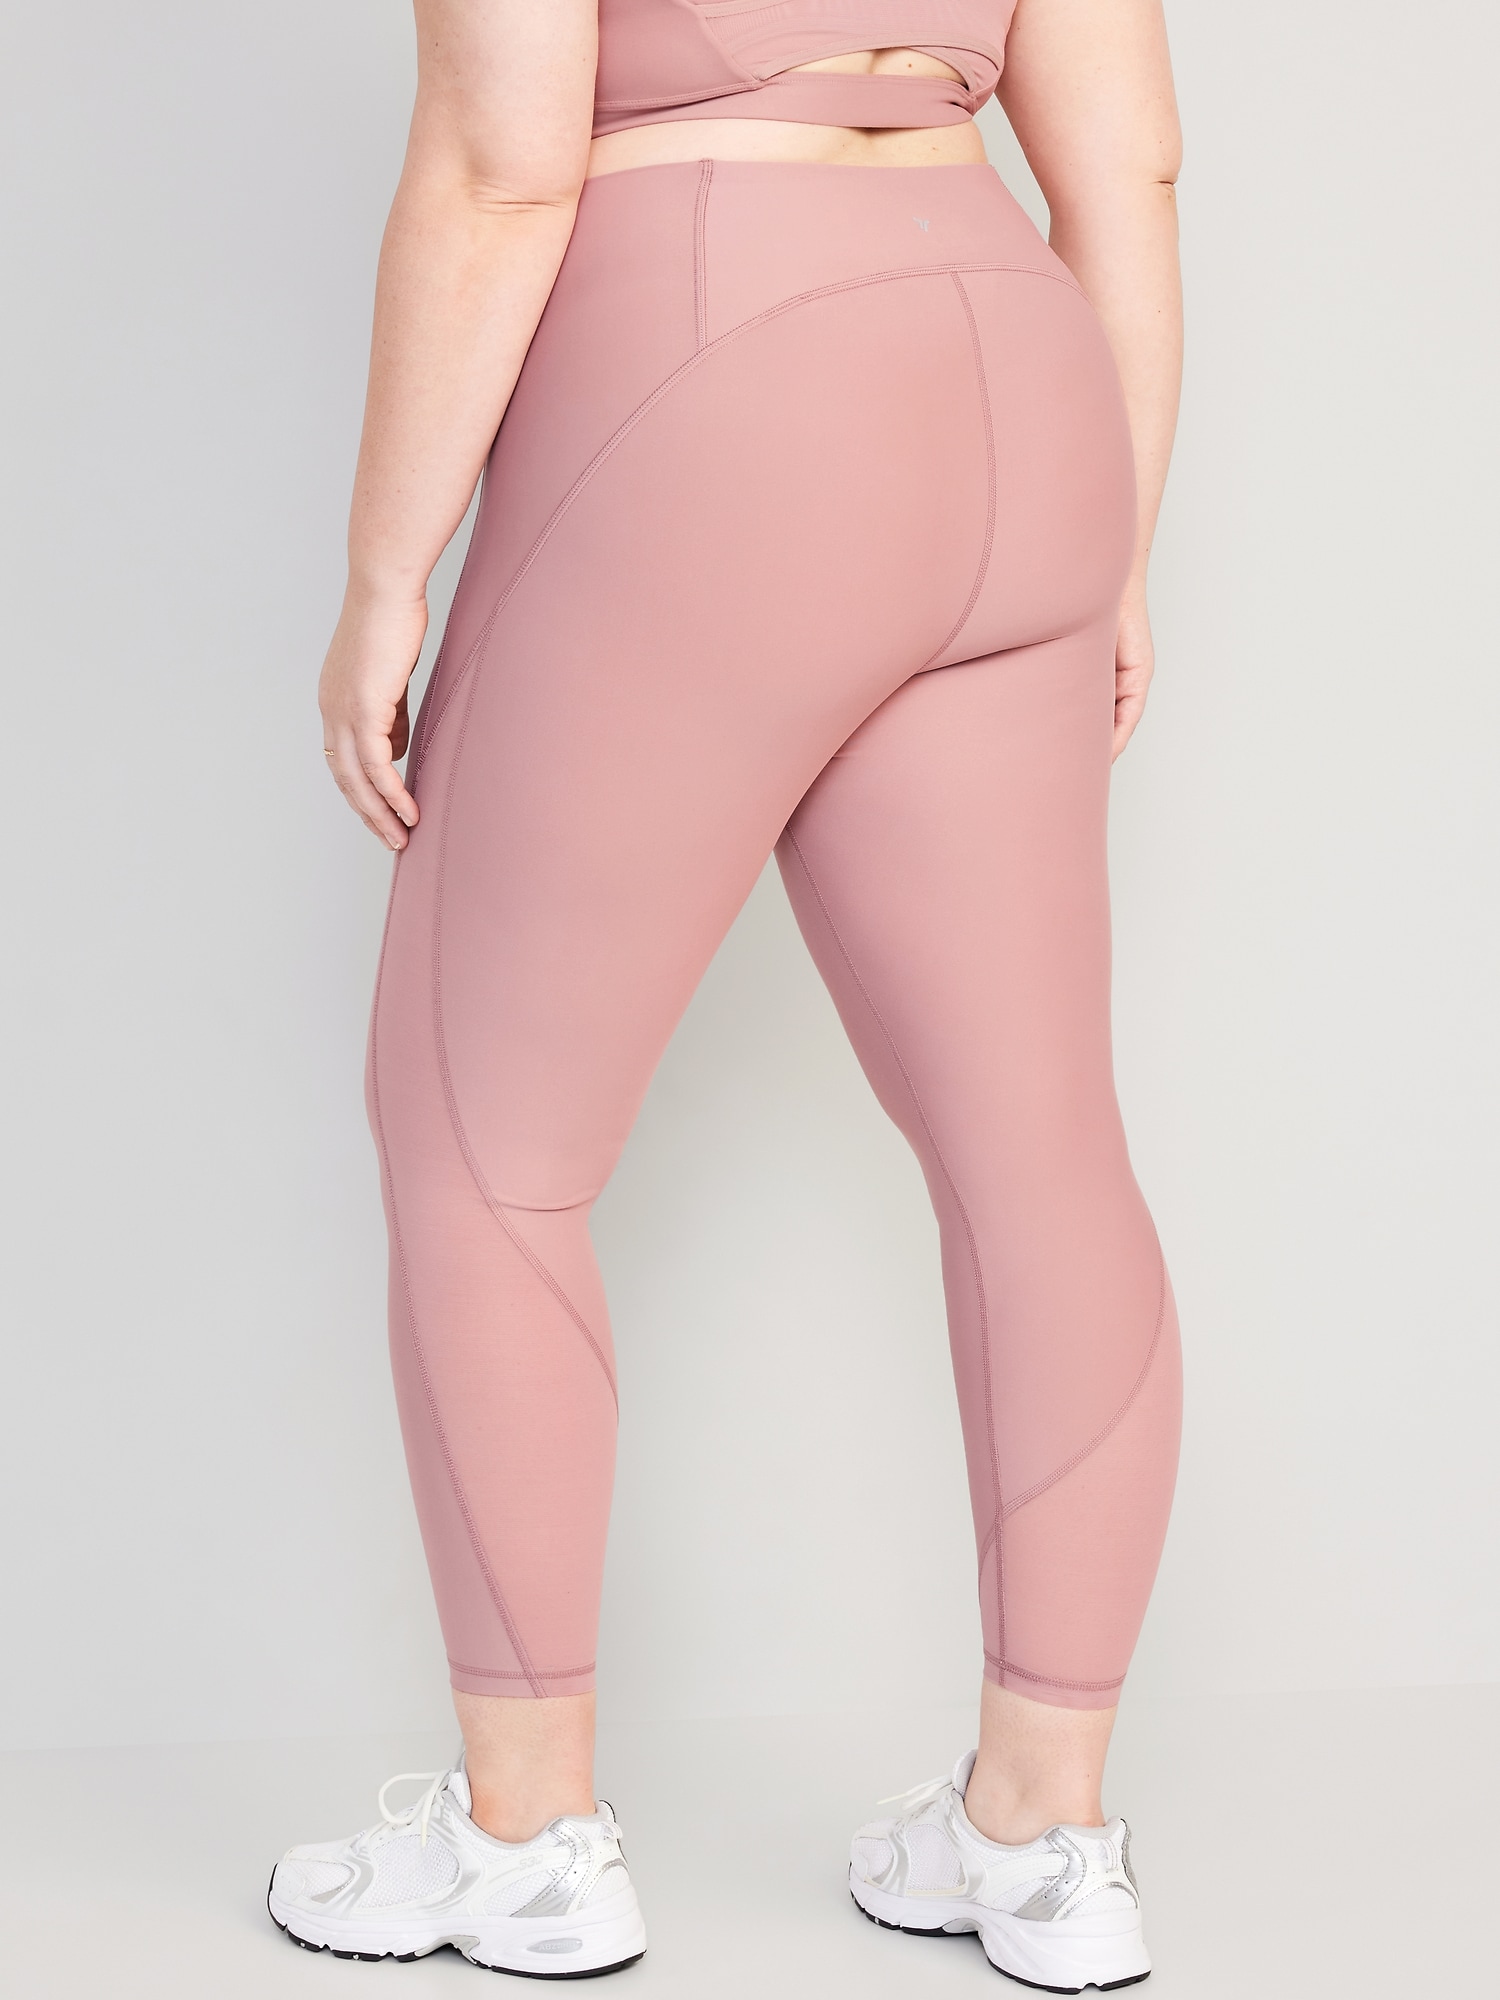 Muscle Up Mommy®, Mesh Panel Leggings, High Waist + Compression